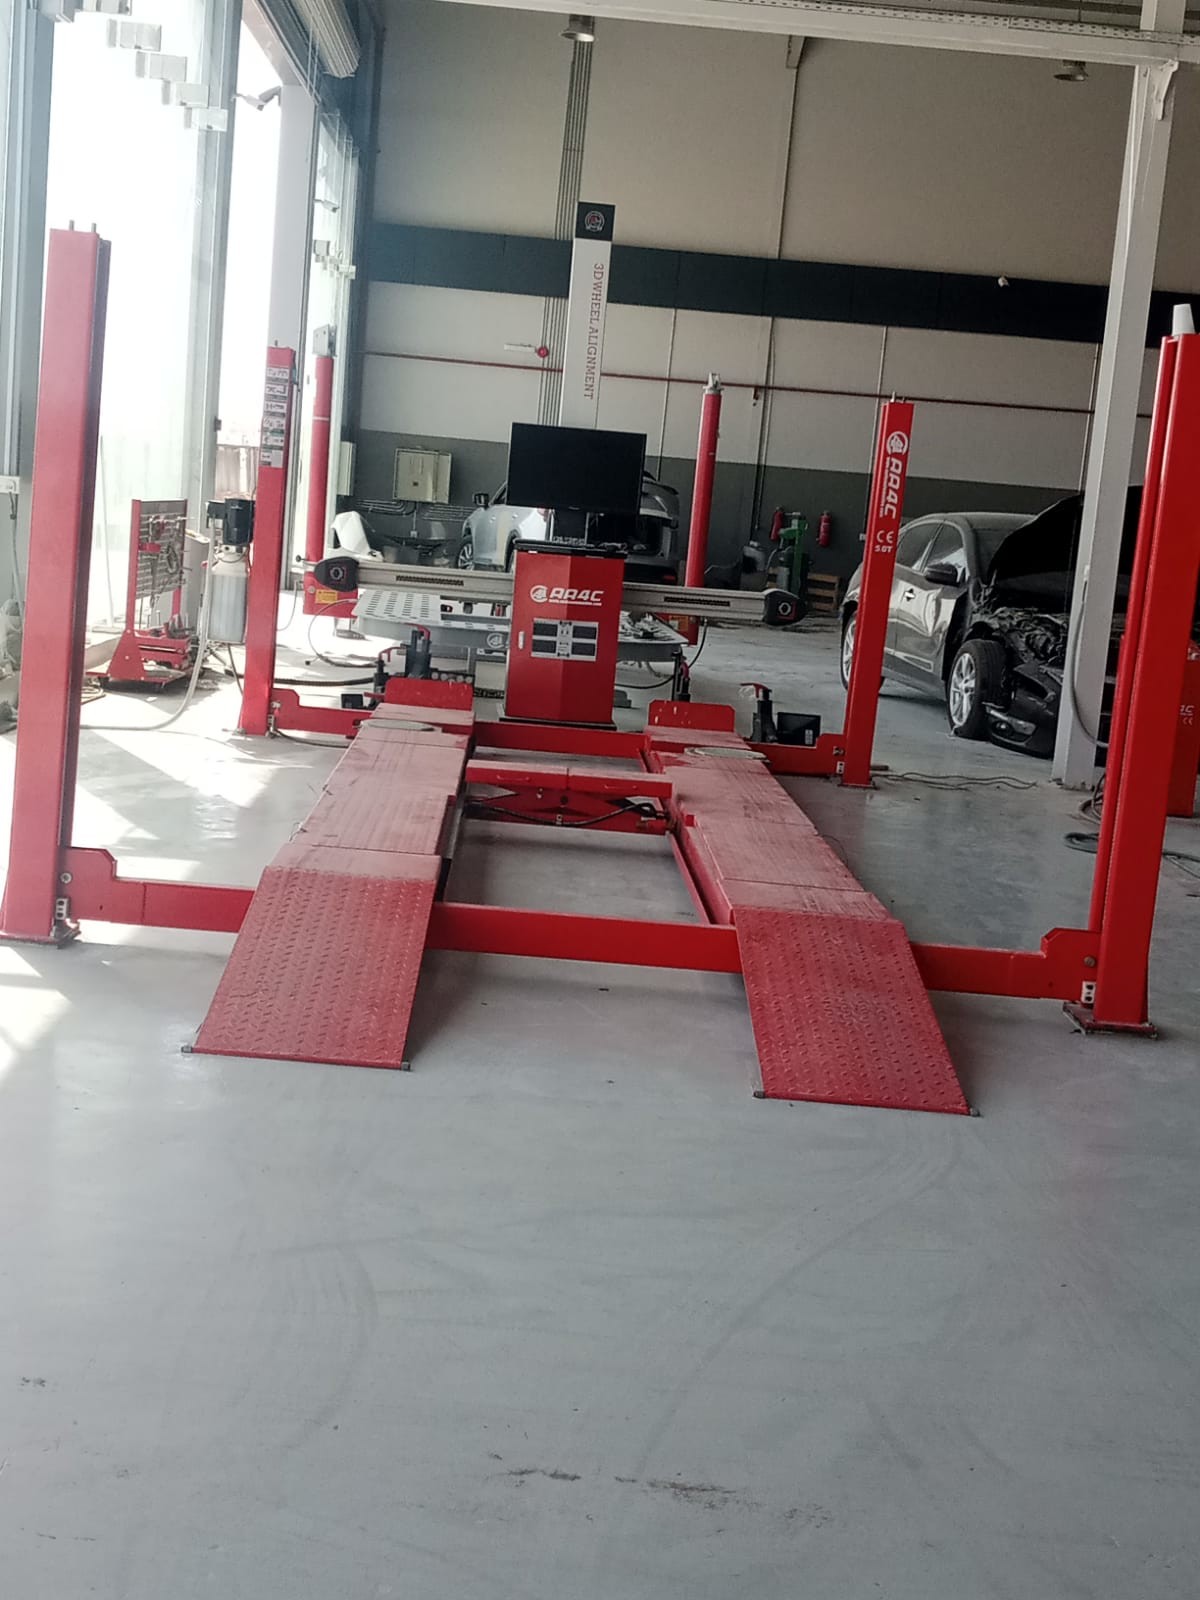 Latest company case about full range garage equipments installed in Saudi Arabia :Spraybooth ,car lift, auto repair bench ,air comperssor, etc